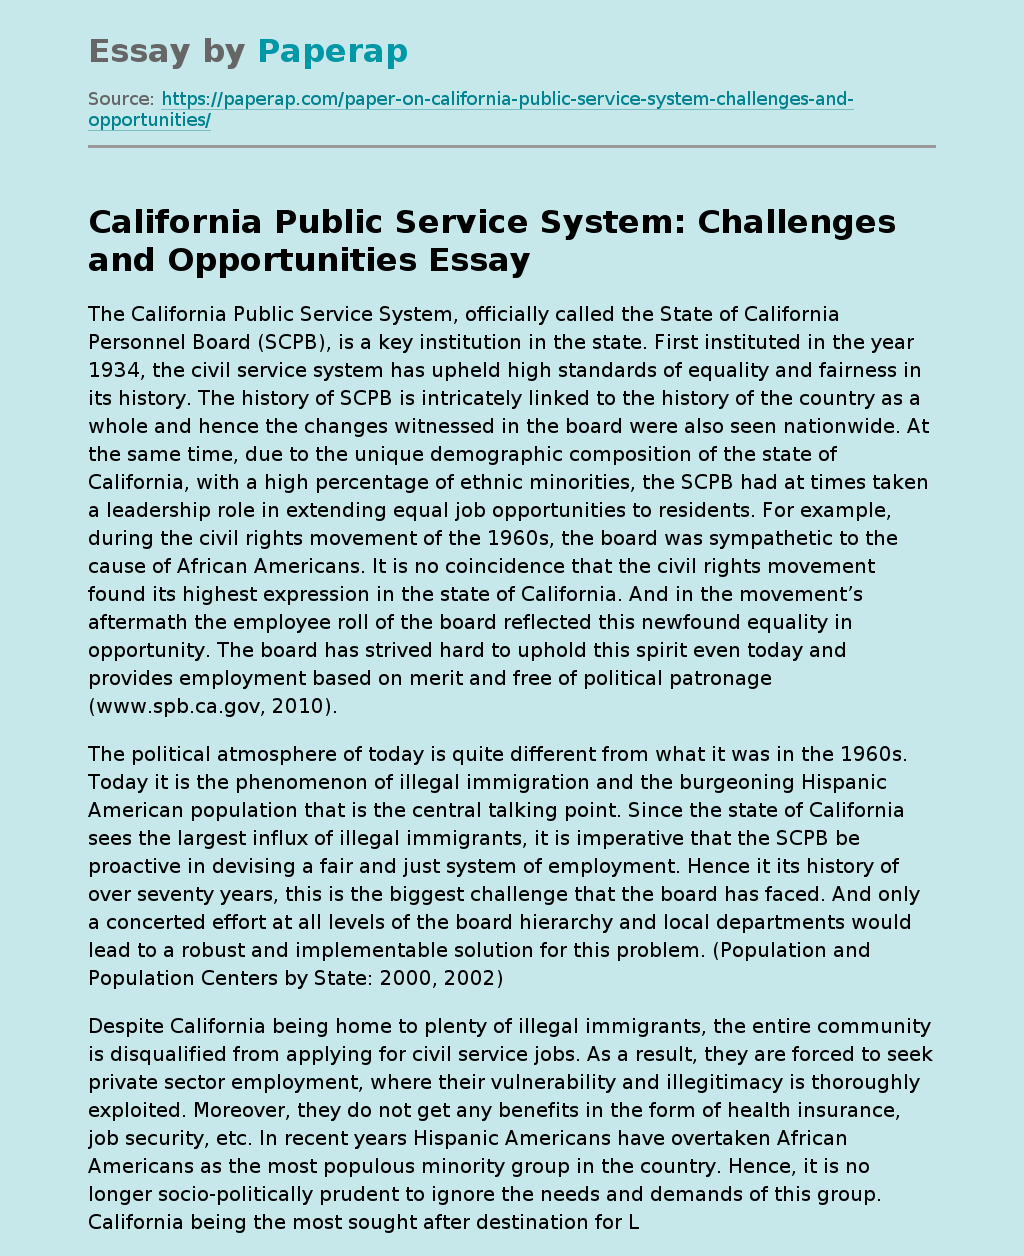 California Public Service System: Challenges and Opportunities